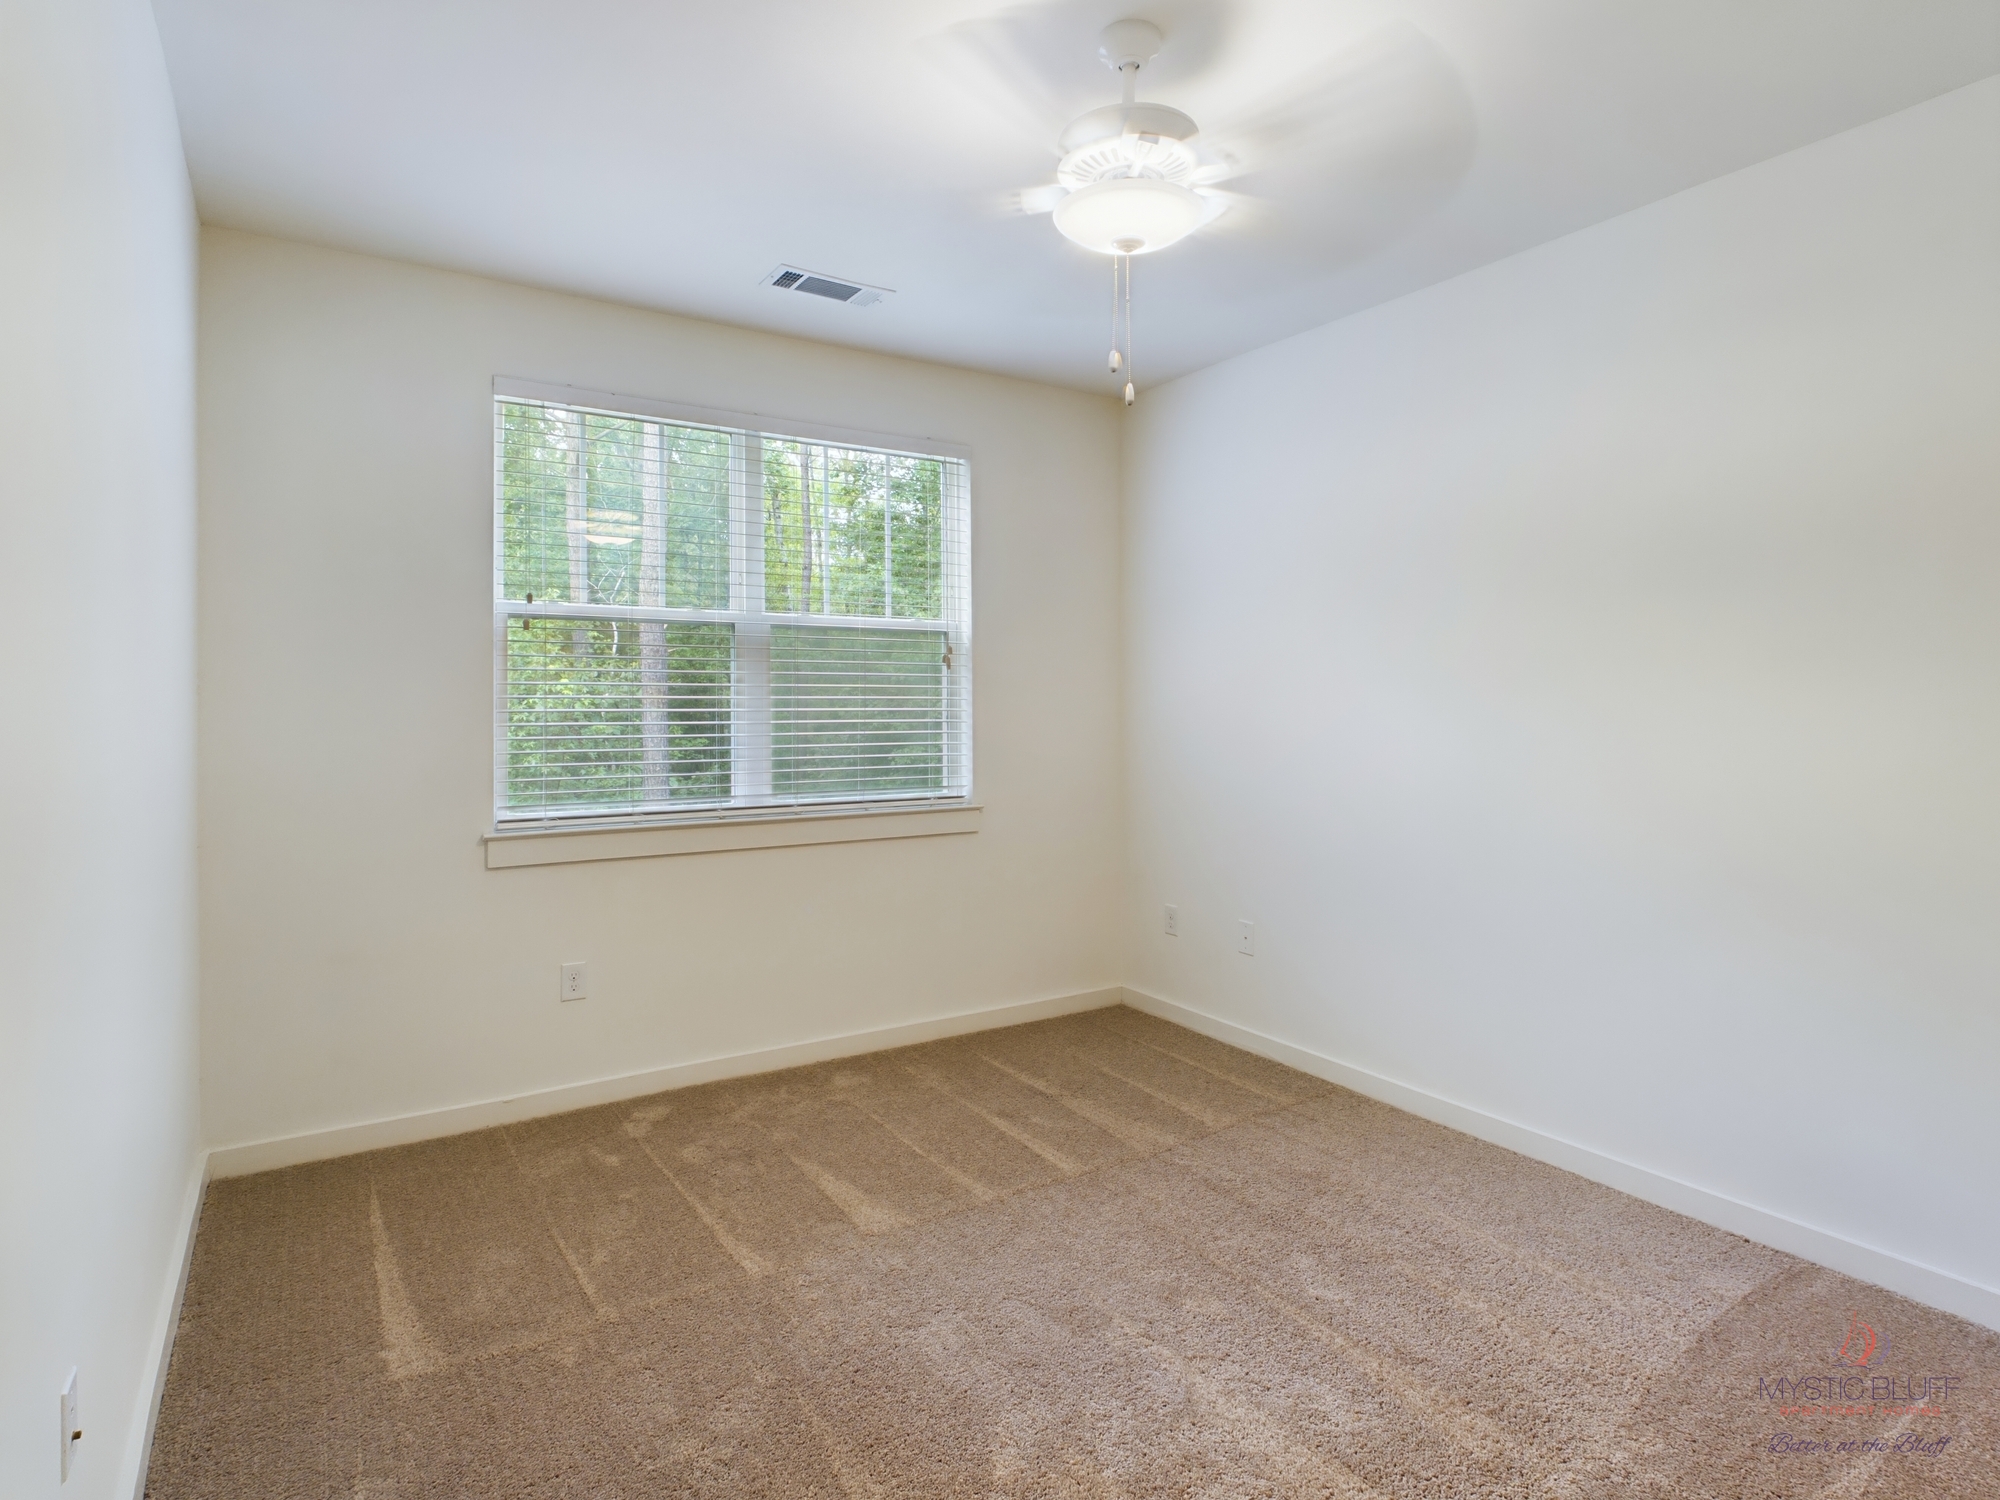 An empty apartment with a ceiling fan and carpet.